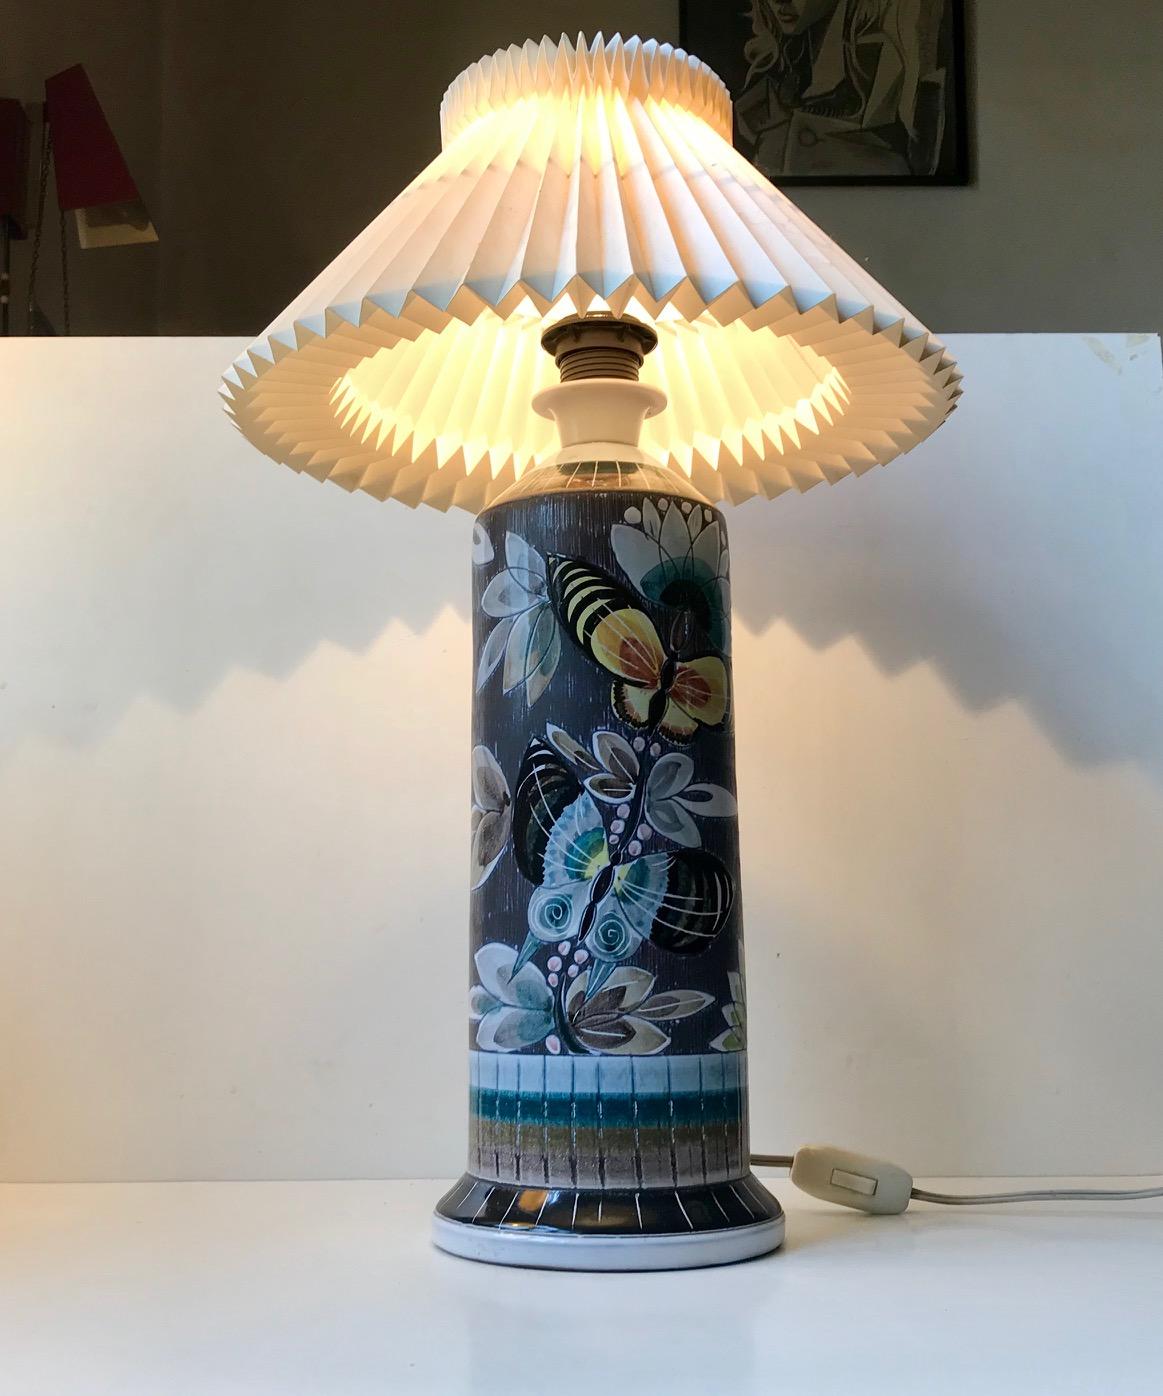 Mid-20th Century Sgraffito Table Lamp with Butterflies by Marian Zawadsky for Alms Keramik, 1960s